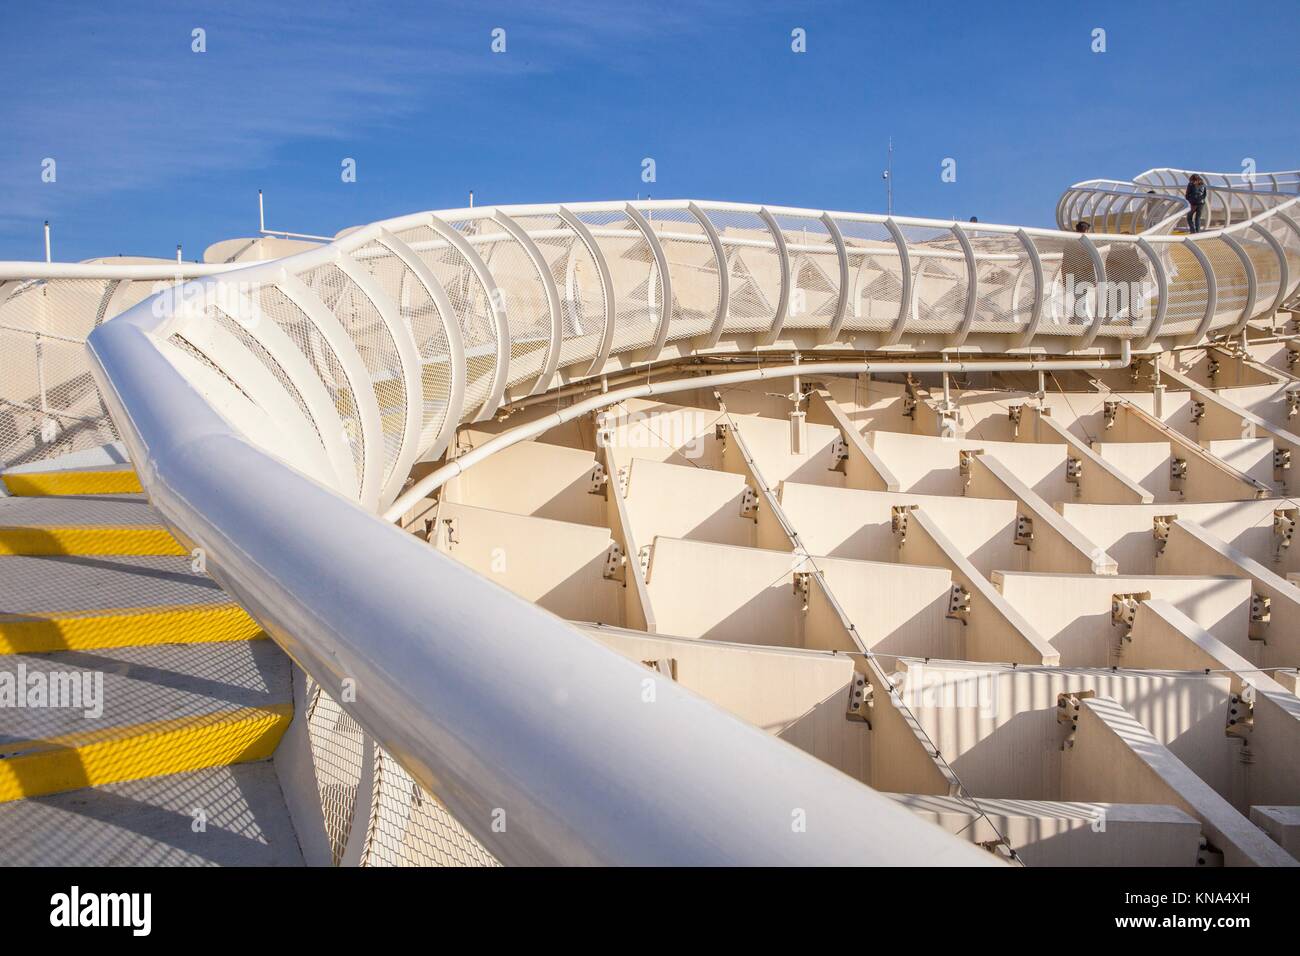 Roof footbridge for pedestrians at Metropol Parasol. It provides a unique view of the old city center and the cathedral. Stock Photo